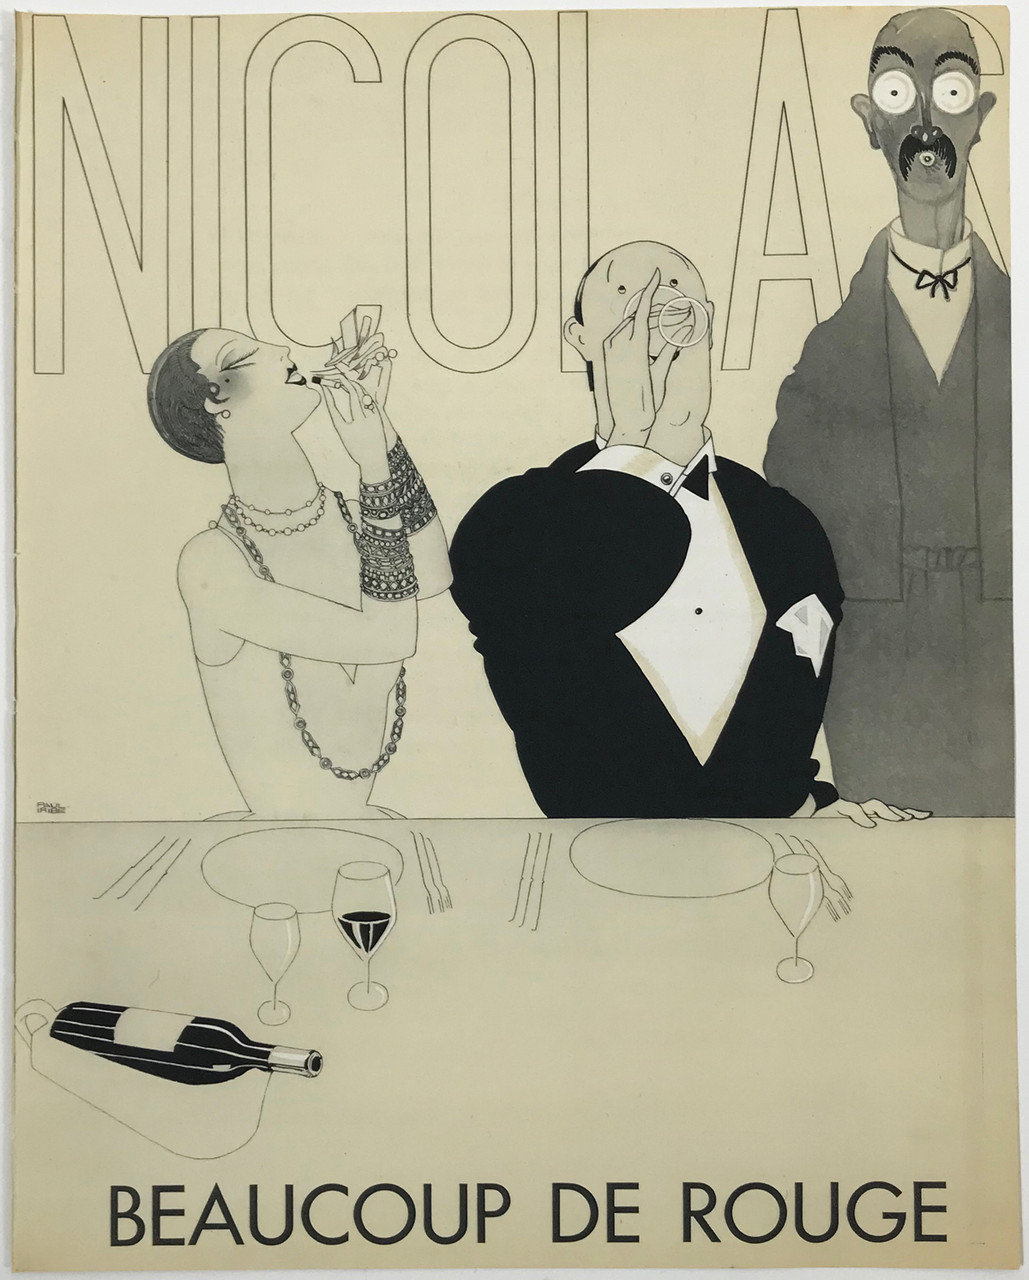 Beaucoup de Rouge by Paul Iribe for Nicolas Blanc et Rouge Plaquette with 10 Designs Original 1930 French Advertising Lithograph Vintage Poster. Shows a couple sitting at the table in the restaurant, behind them waiter is standing. Woman uses a lipstick, man drinking a glass of wine.  